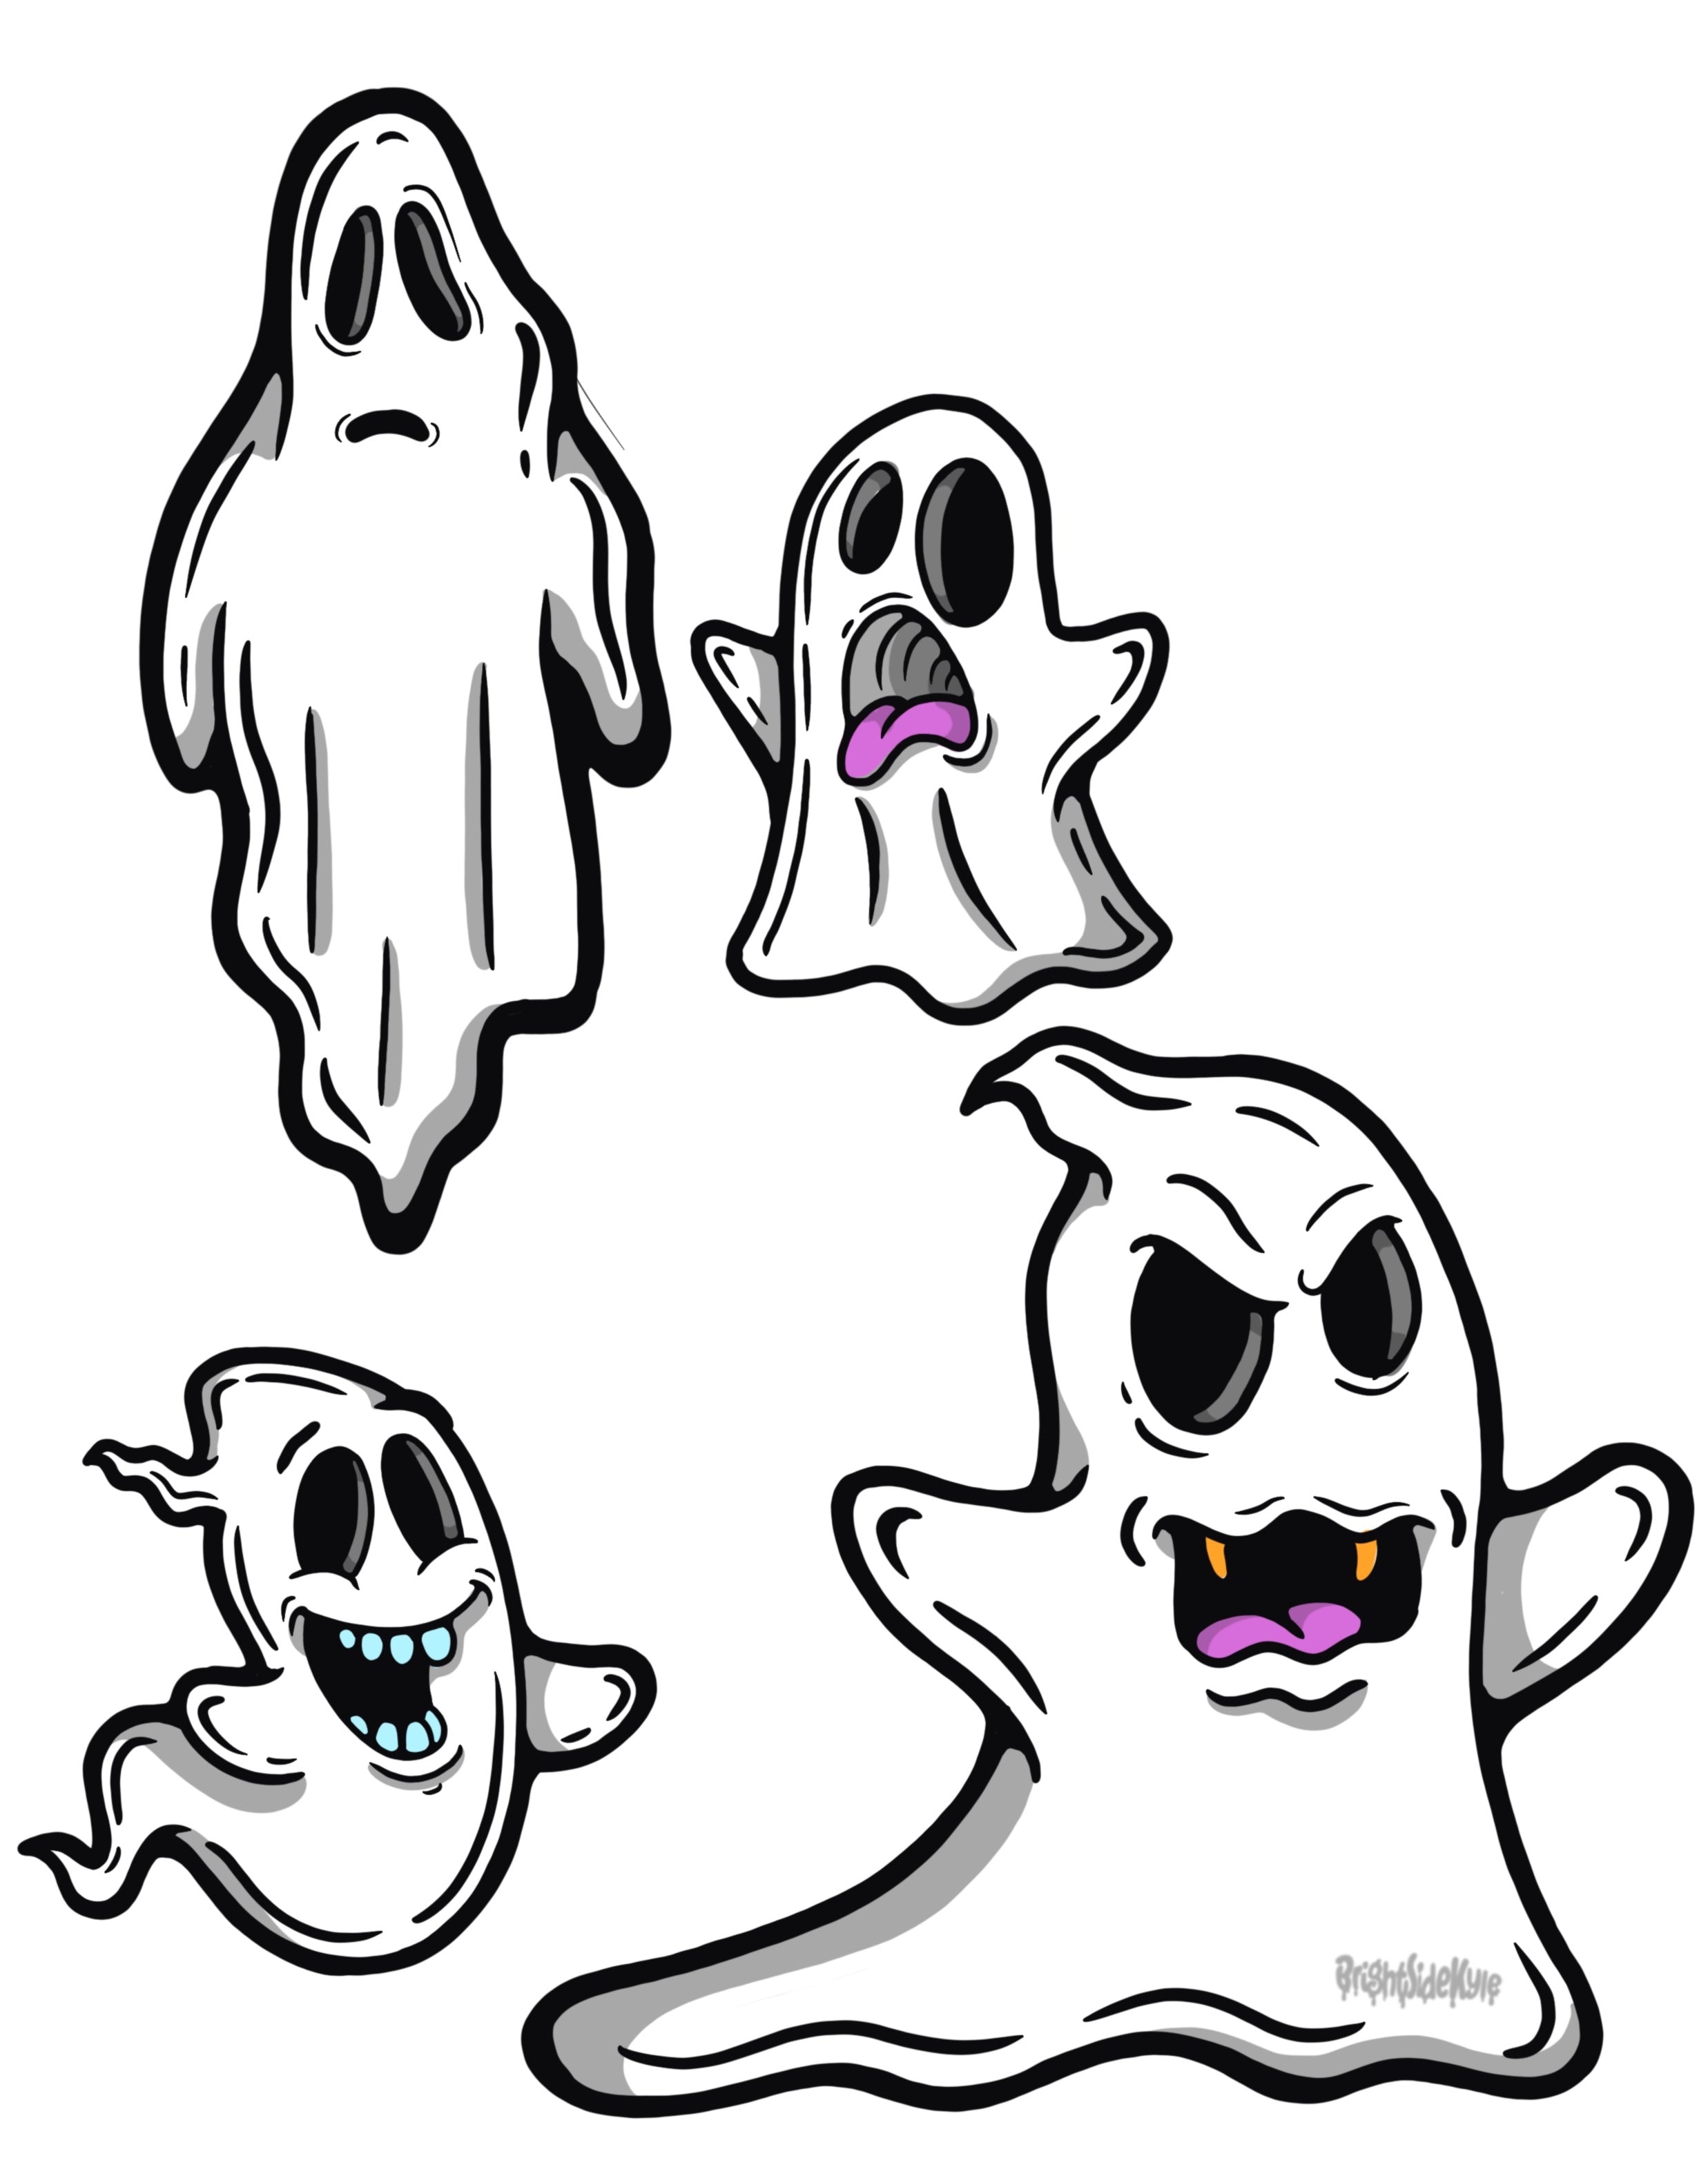 Wall Art Decal - Ghost Set